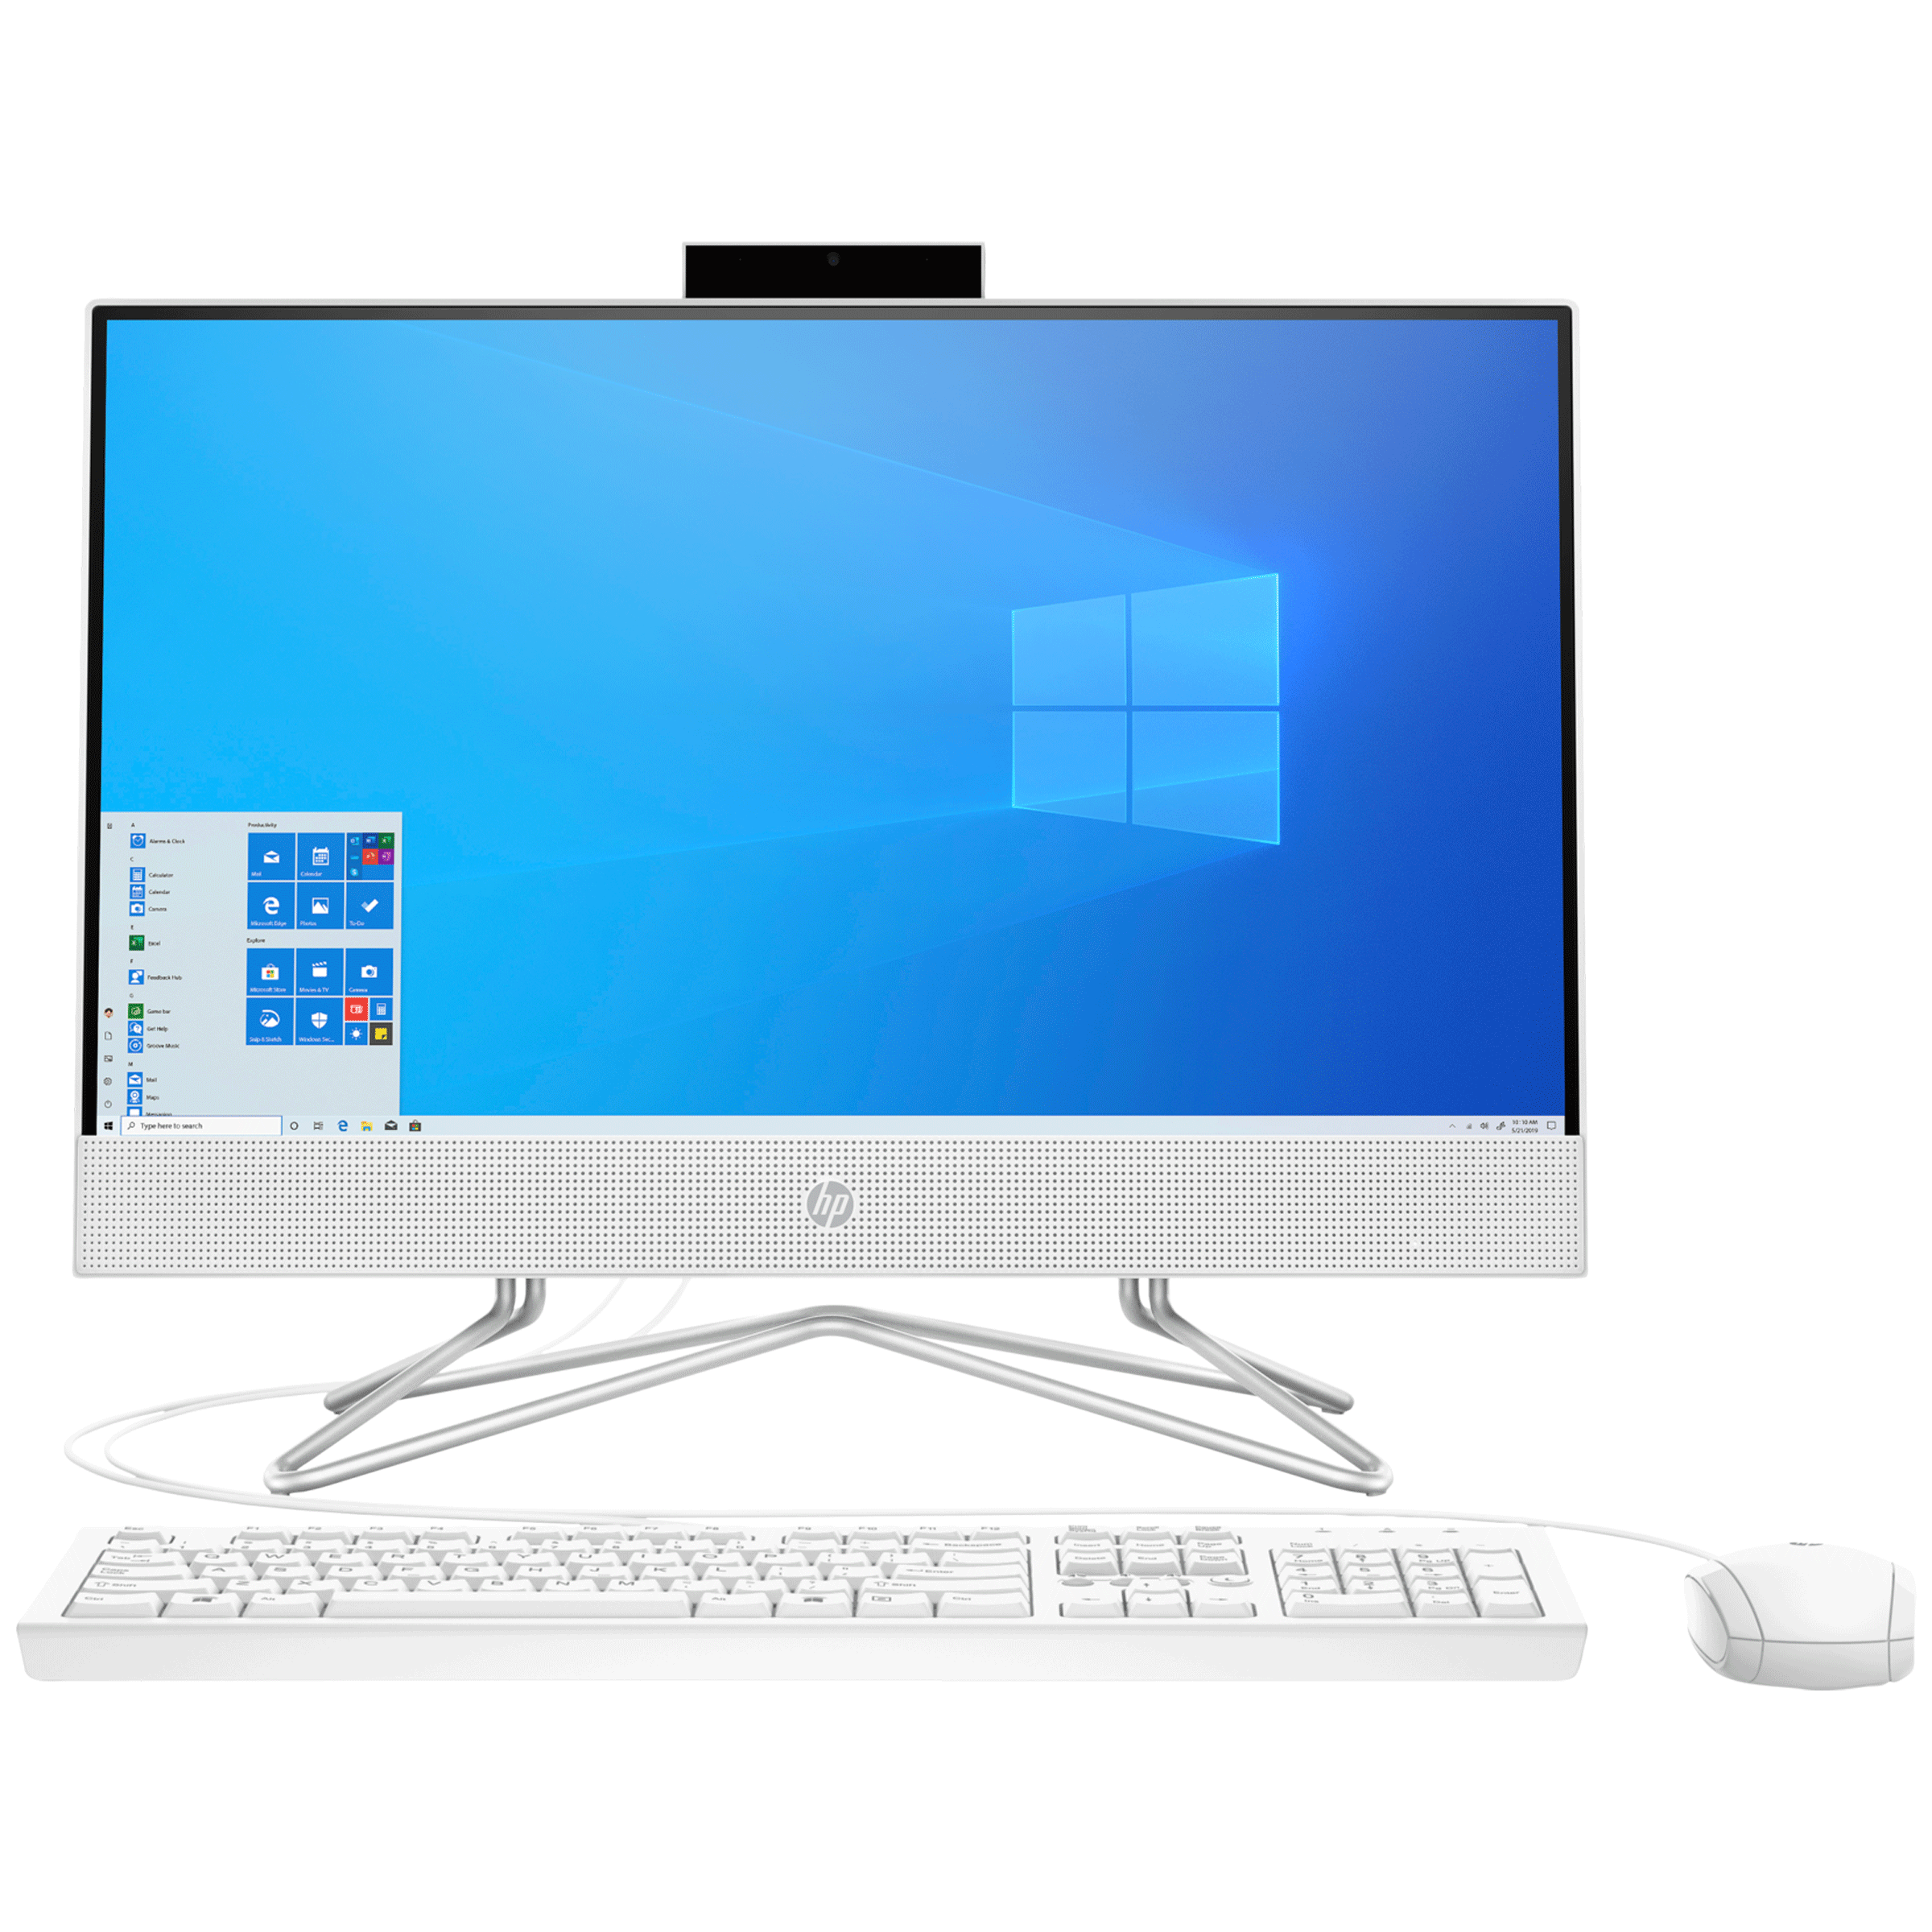 HP All-in-One 22-df0202 Ryzen 3 Windows 11 Home All-in-One Desktop (8GB RAM, 1TB HDD, AMD Radeon Graphics, 54.61cm (21.5 Inches), 515S5PA, White)_1